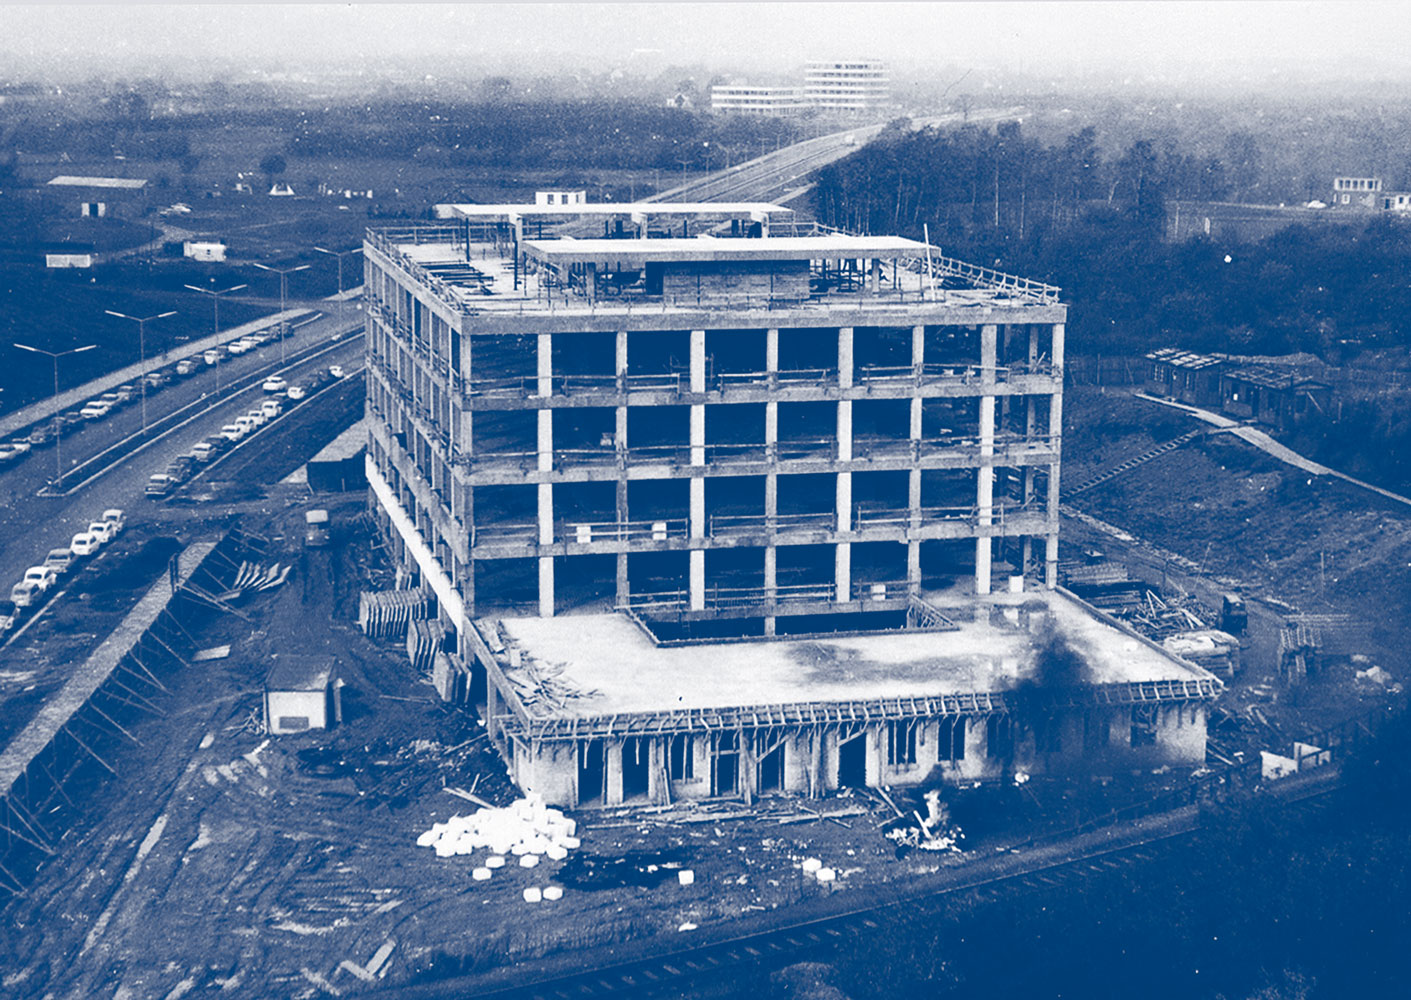 The IPN building under construction